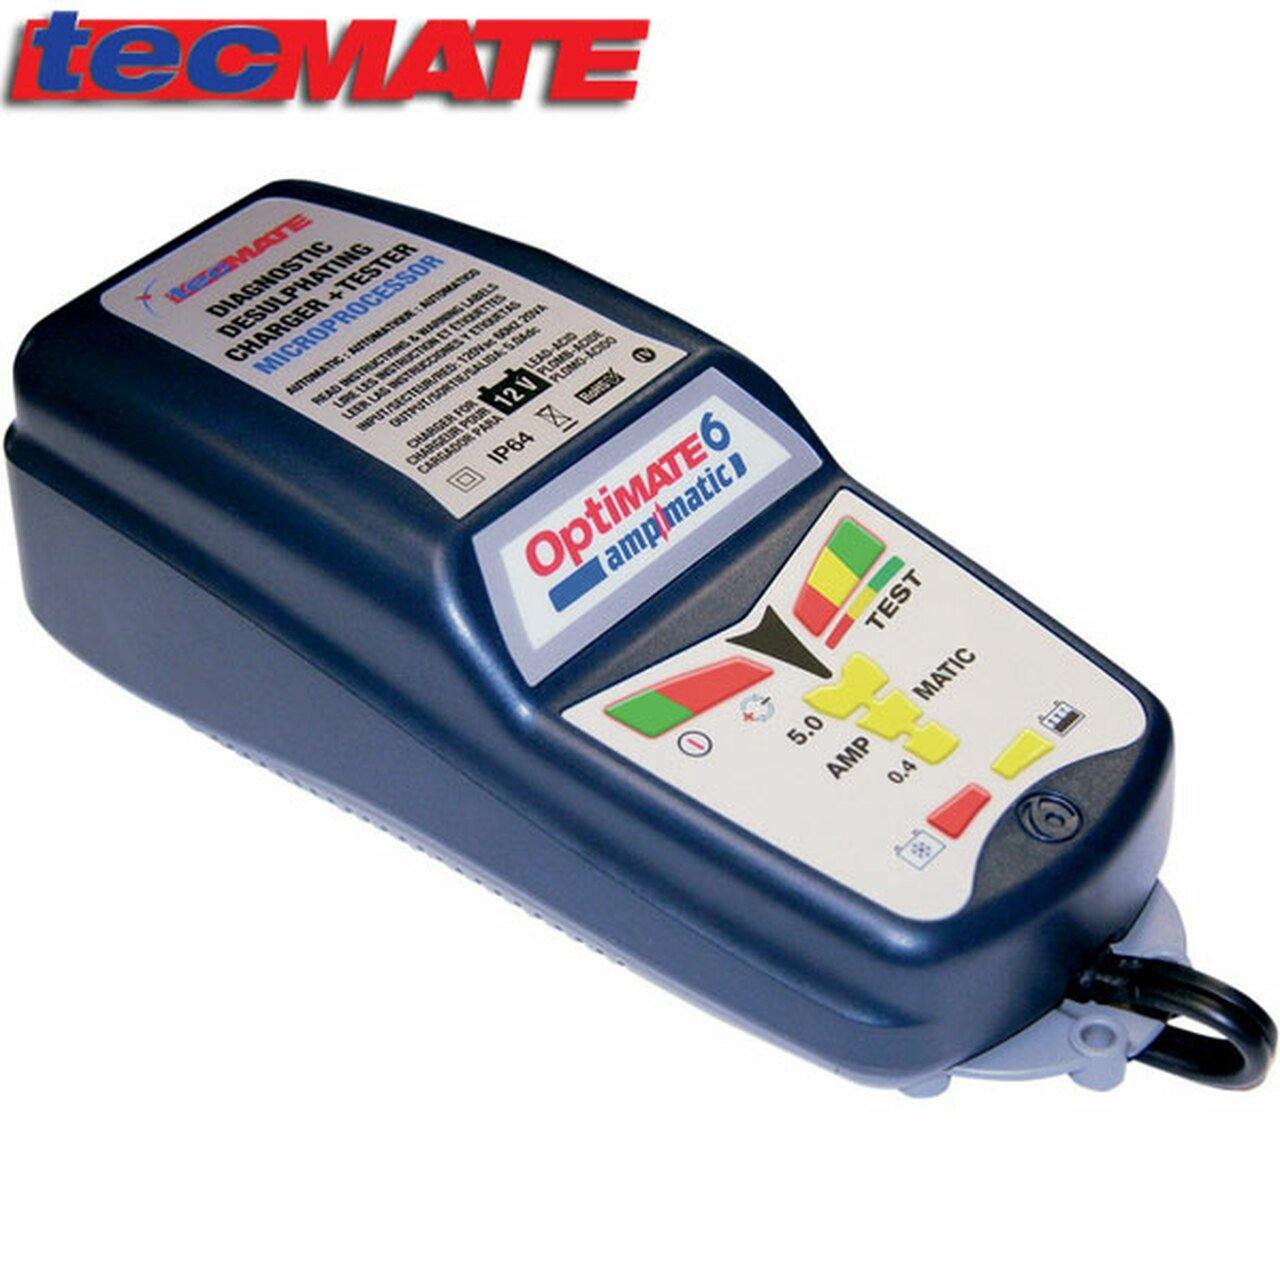 TECMATE Optimate™ 6 Select Gold Battery Charger